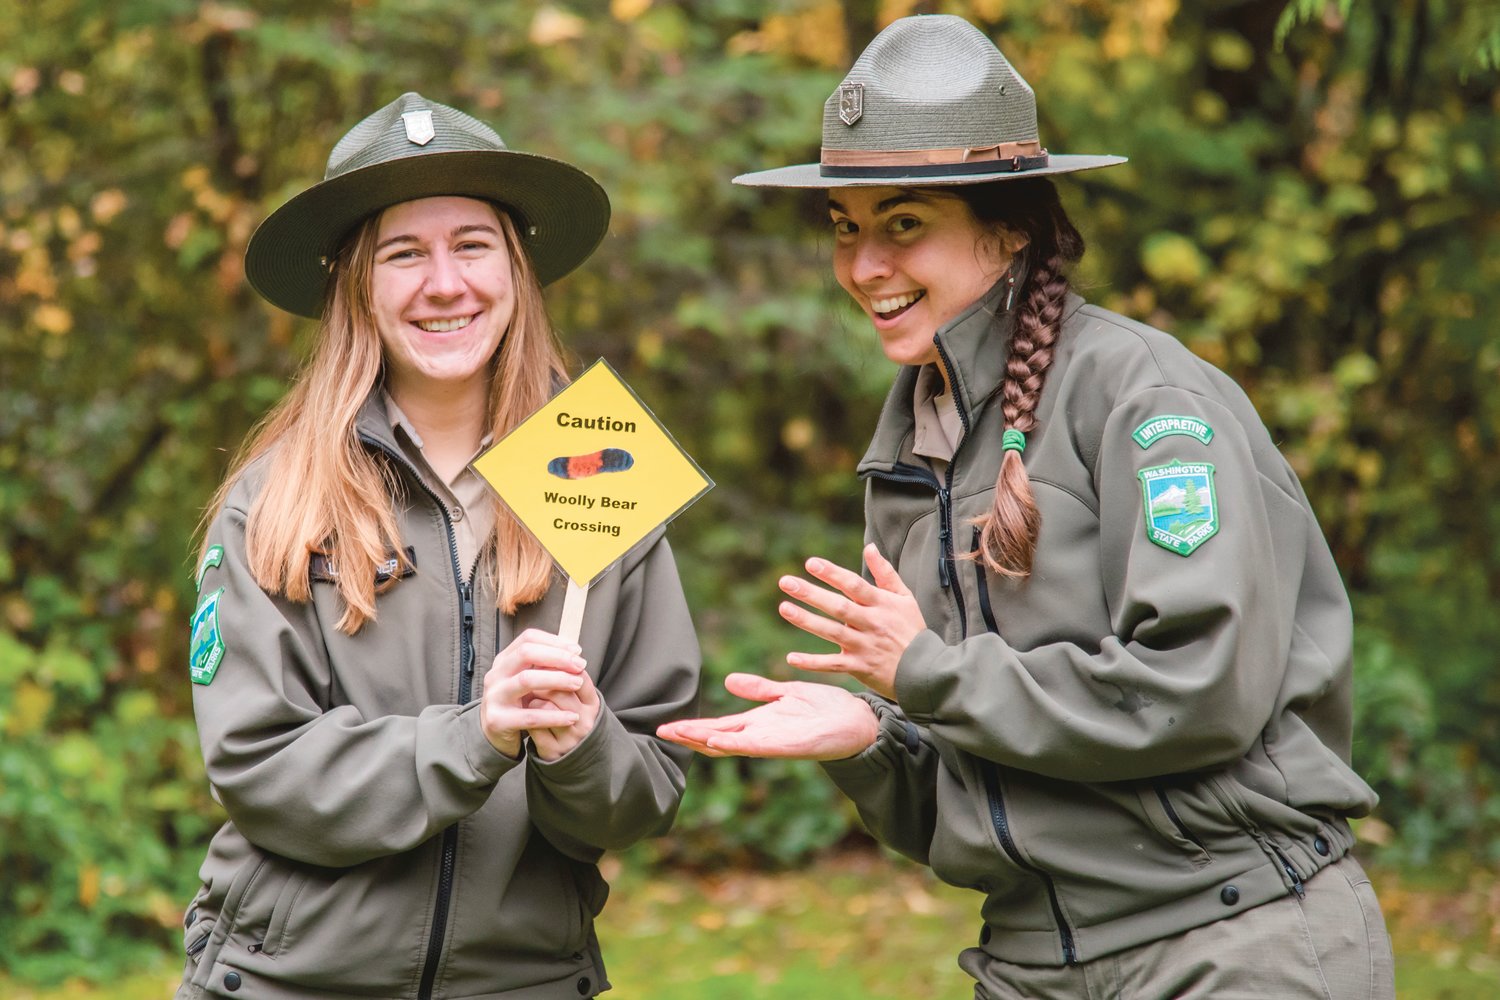 Leah Garner and Alysa Adams smile and pose for a photo with a sign that reads "Caution, Woolly Bear Crossing" at Lewis and Clark State Park Thursday morning.